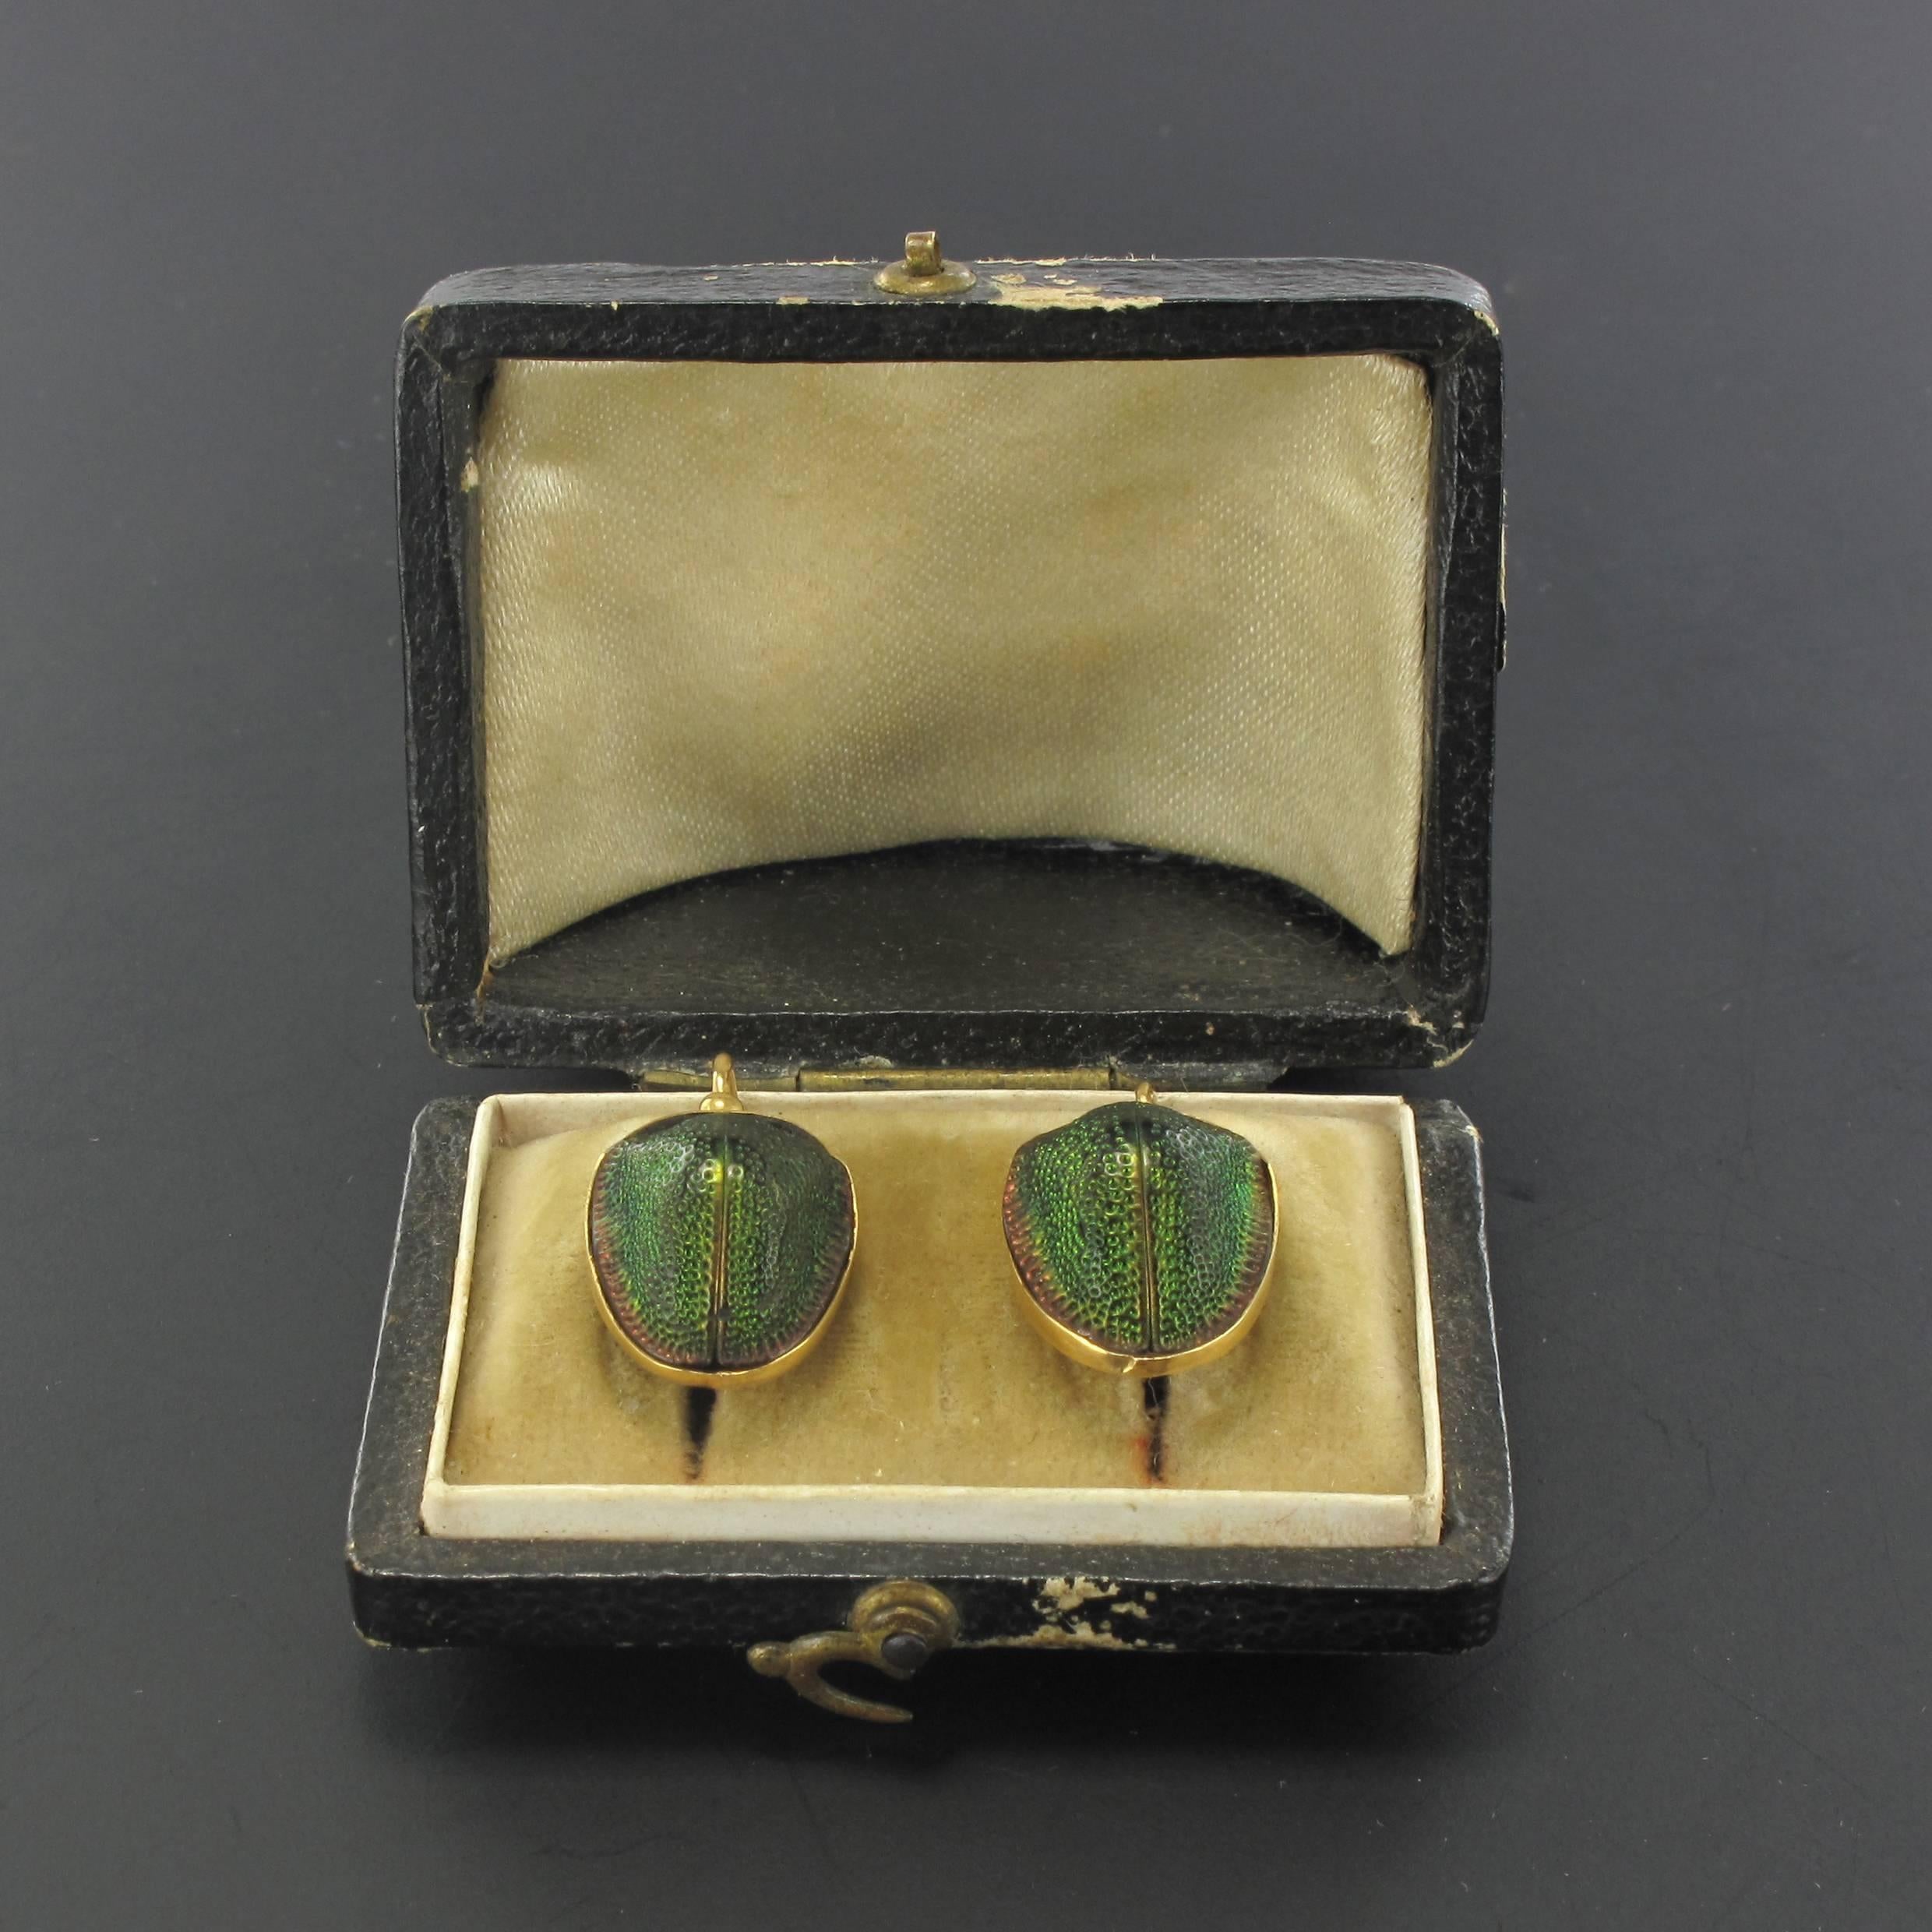 Earrings in 18 carat yellow gold, eagle head hallmark. 
These rare sleeper earrings are set with real beetles with iridescent green and red hues. 
Each antique sleeper earring is set at the top with a small golden bead that marks the beginning of